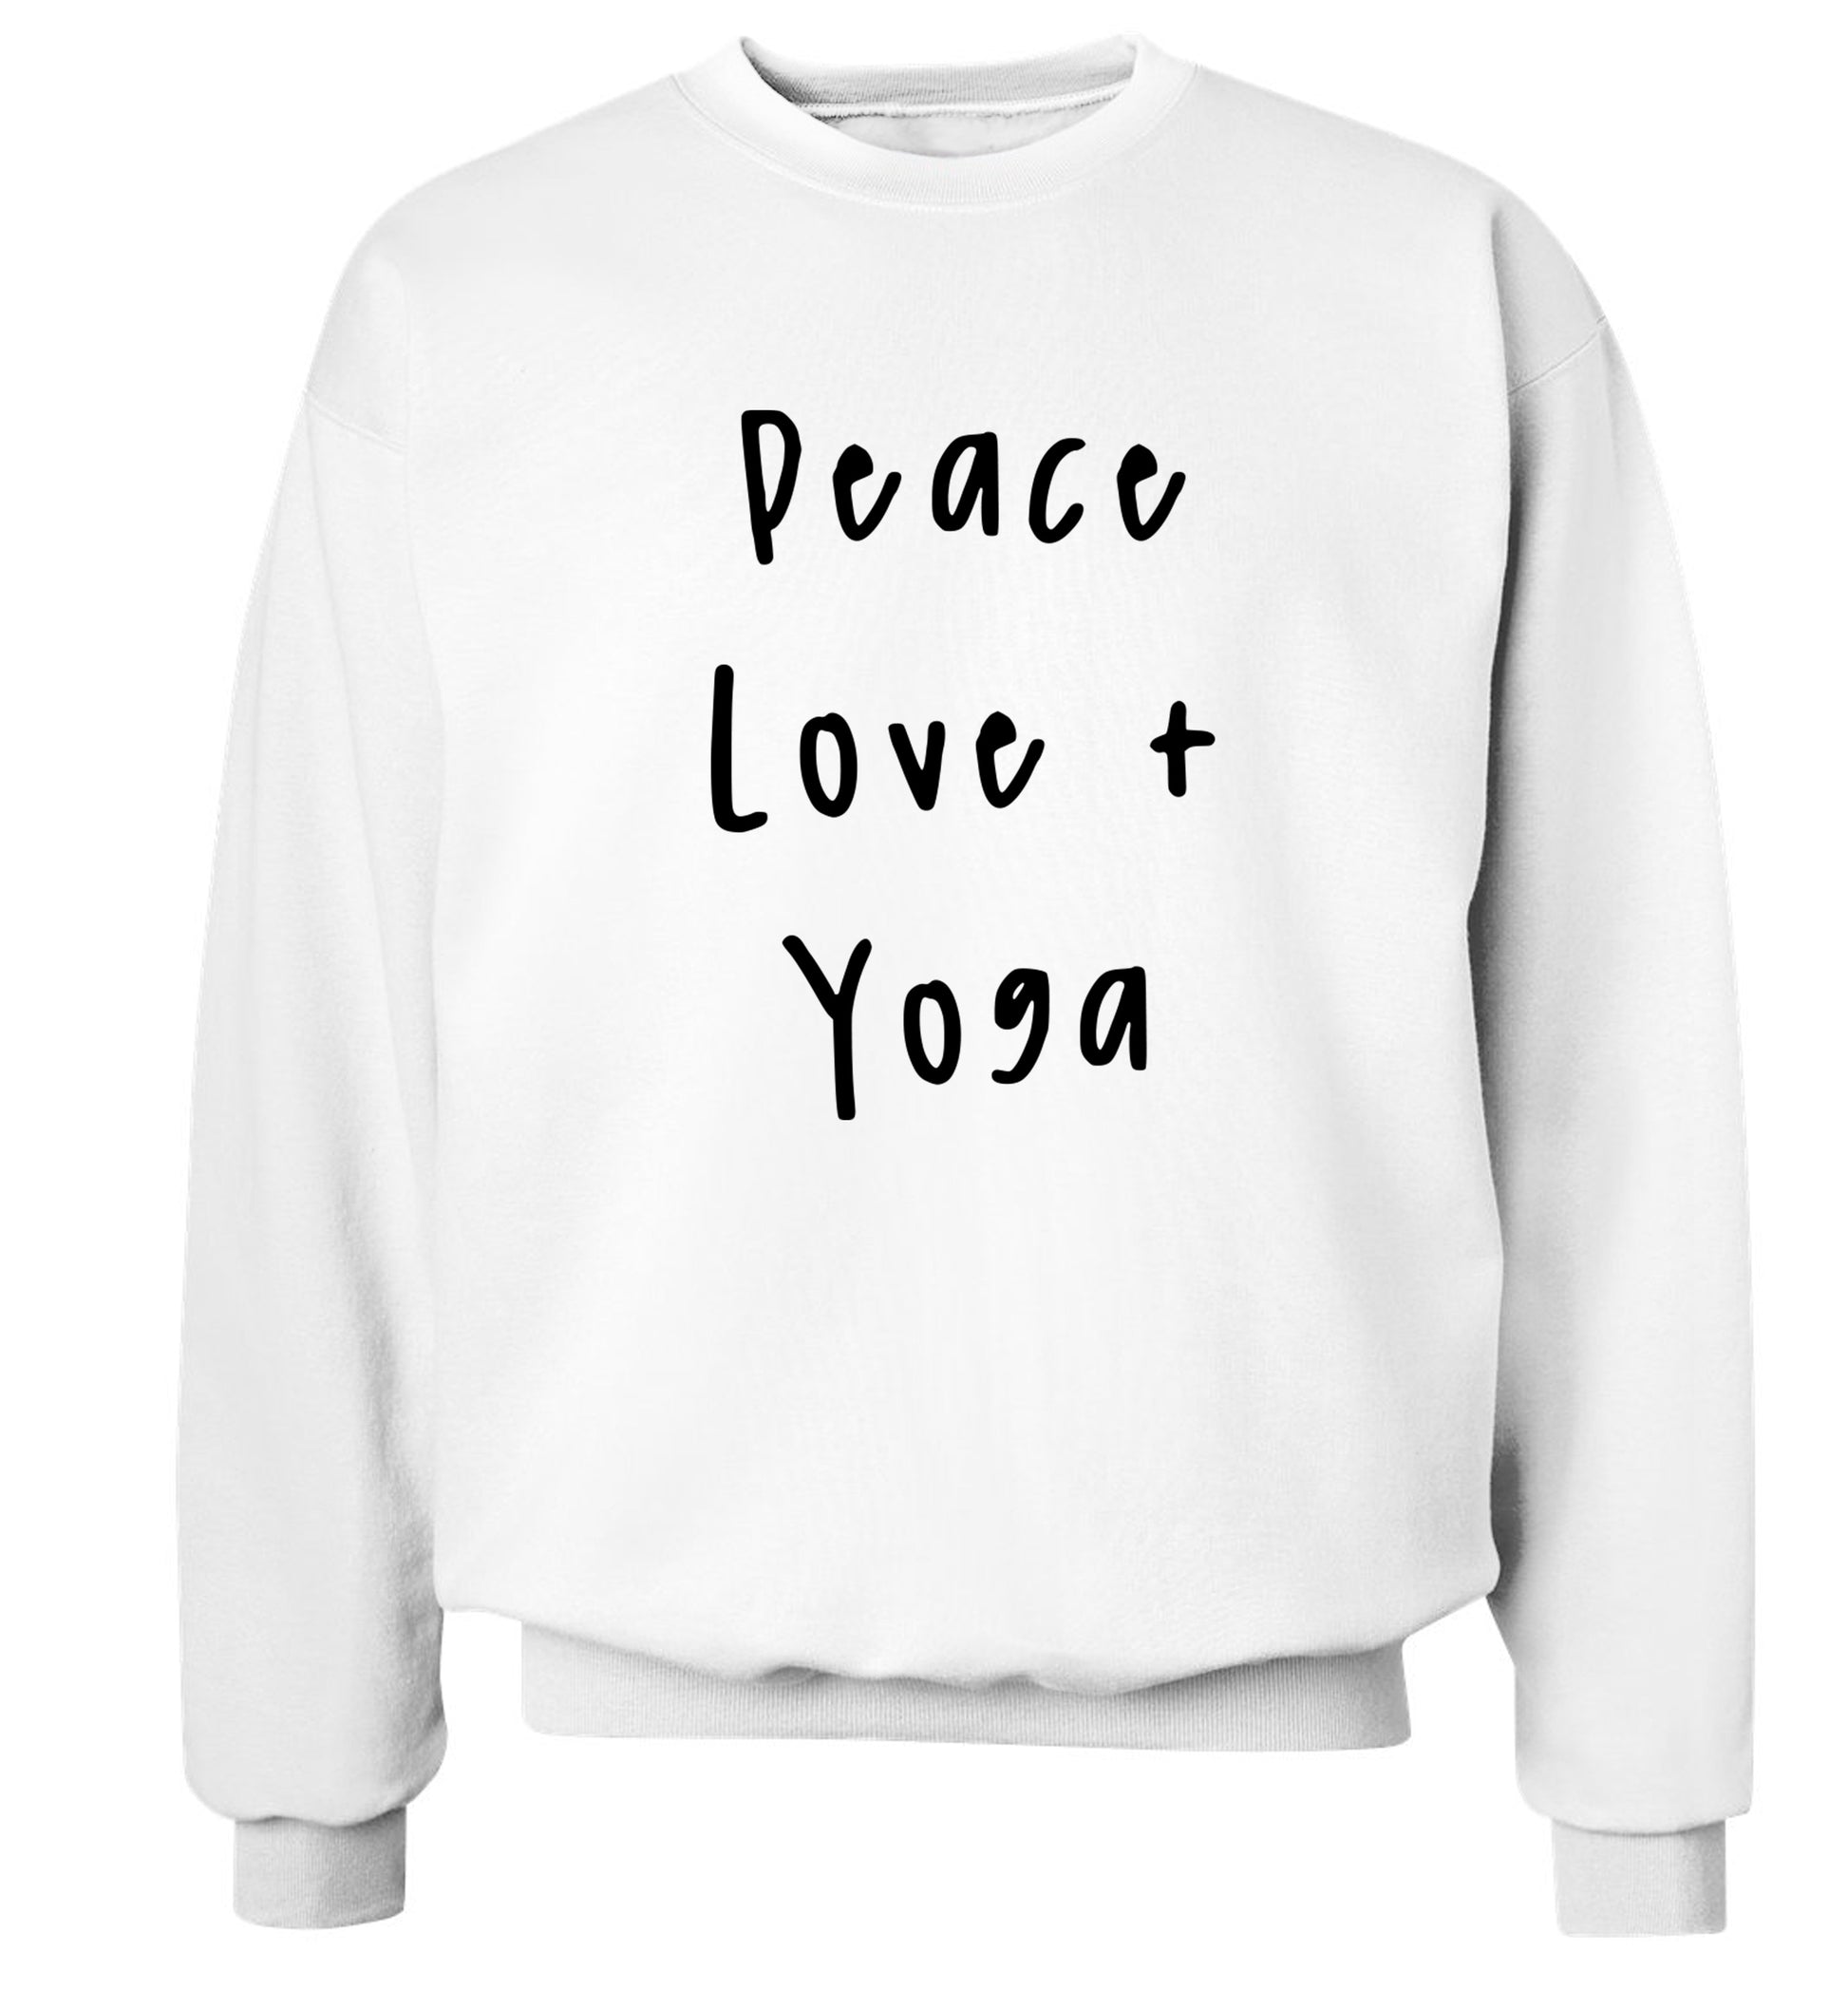 Peace love and yoga Adult's unisex white Sweater 2XL